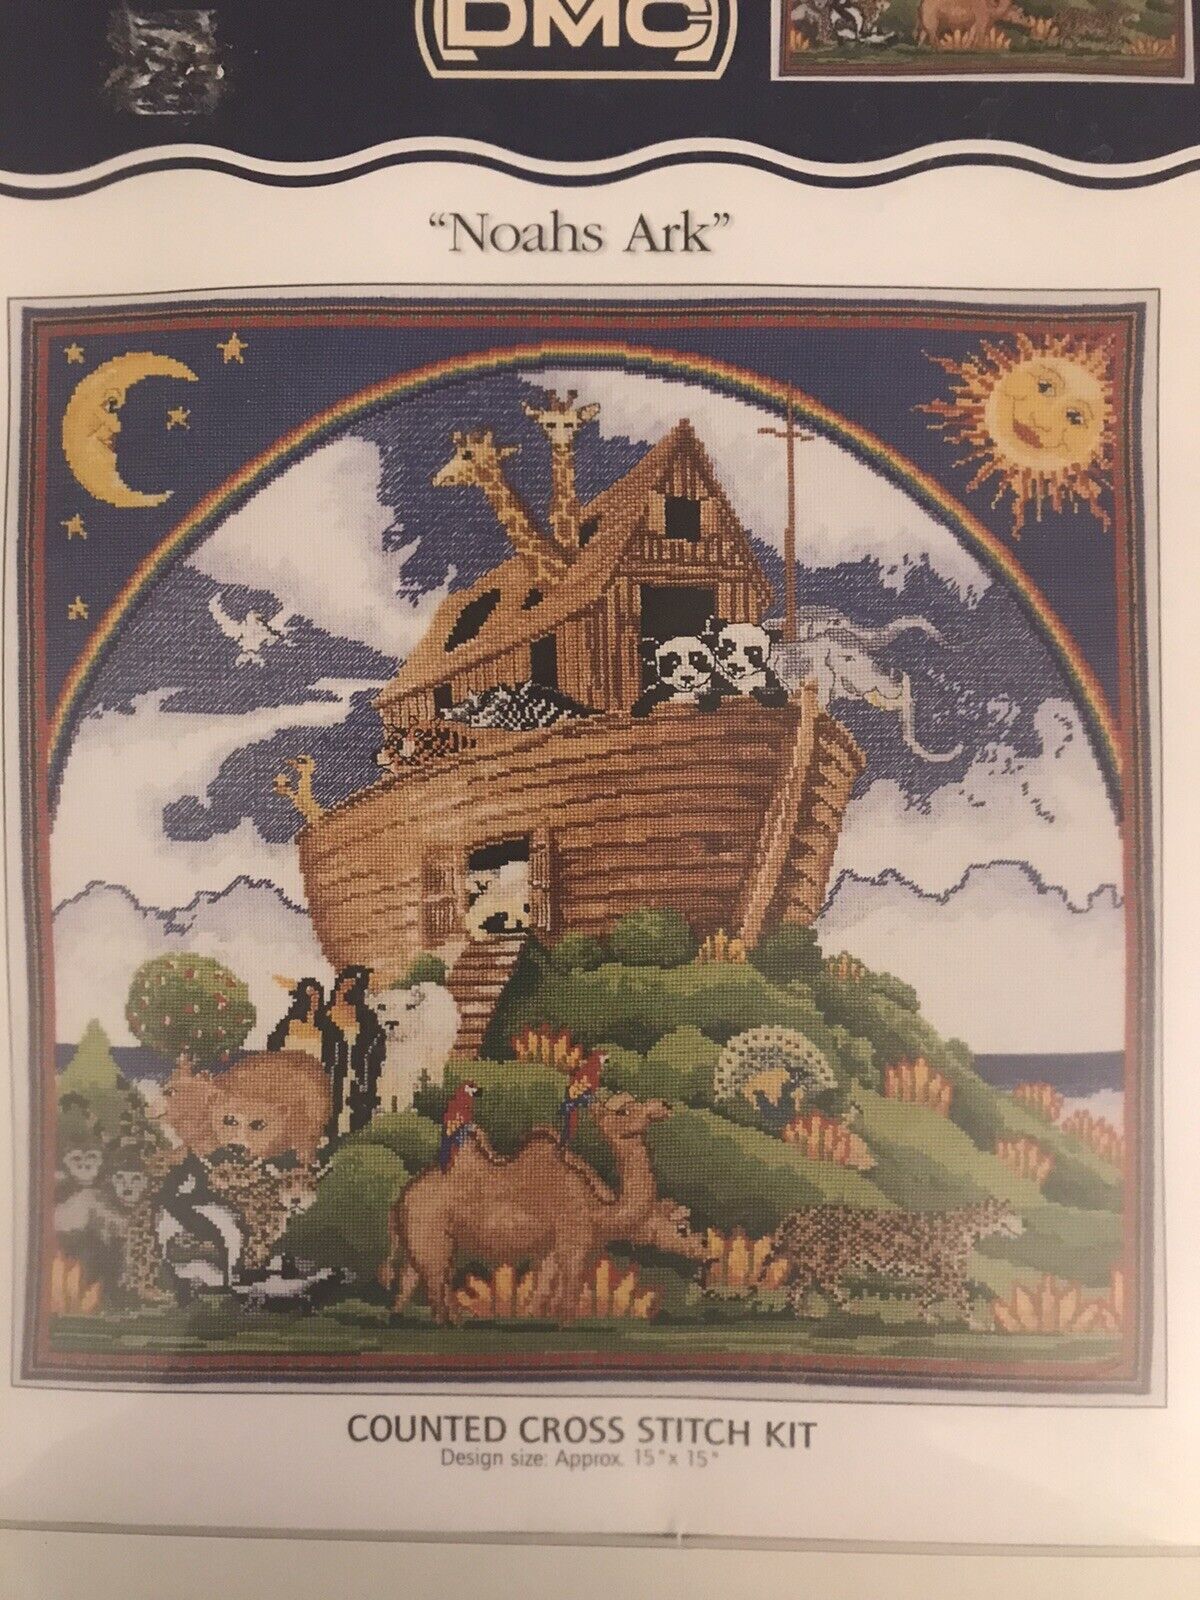 DMC Creative World Noahs Ark Counted Cross Stitch Kit New in Package England - $13.85